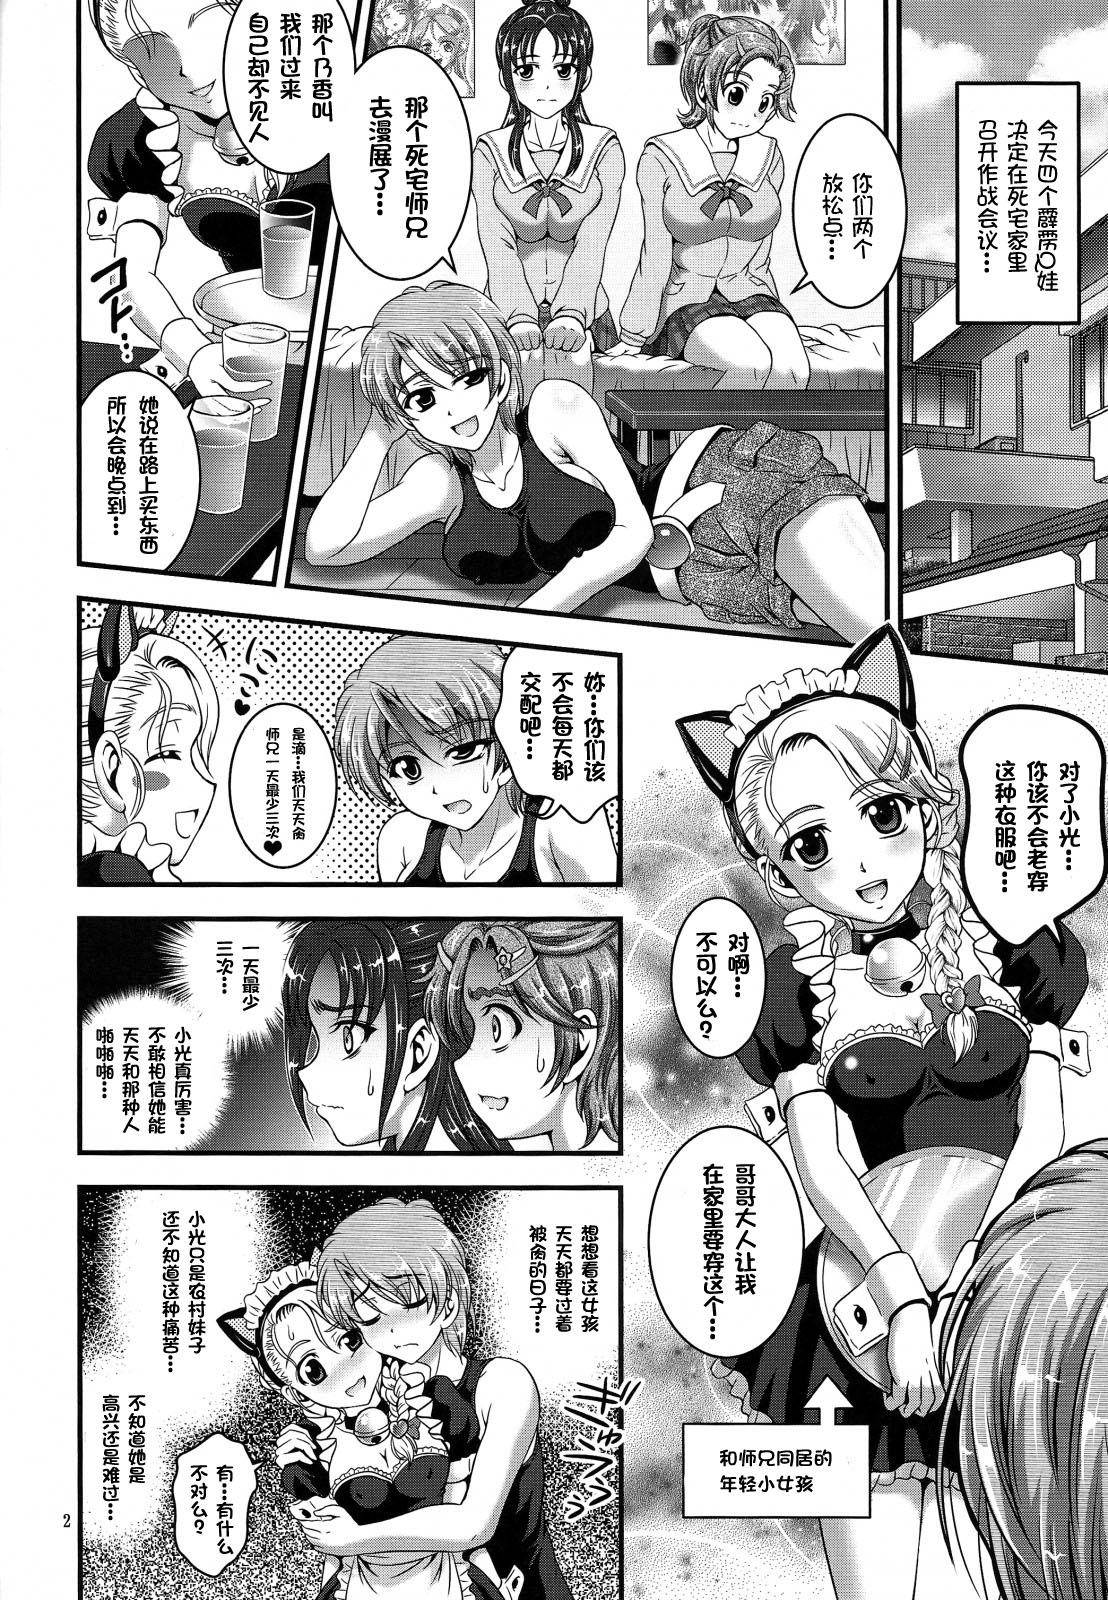 Old Ore Yome Ranking 1 - Pretty cure Pretty cure splash star Stretching - Page 3